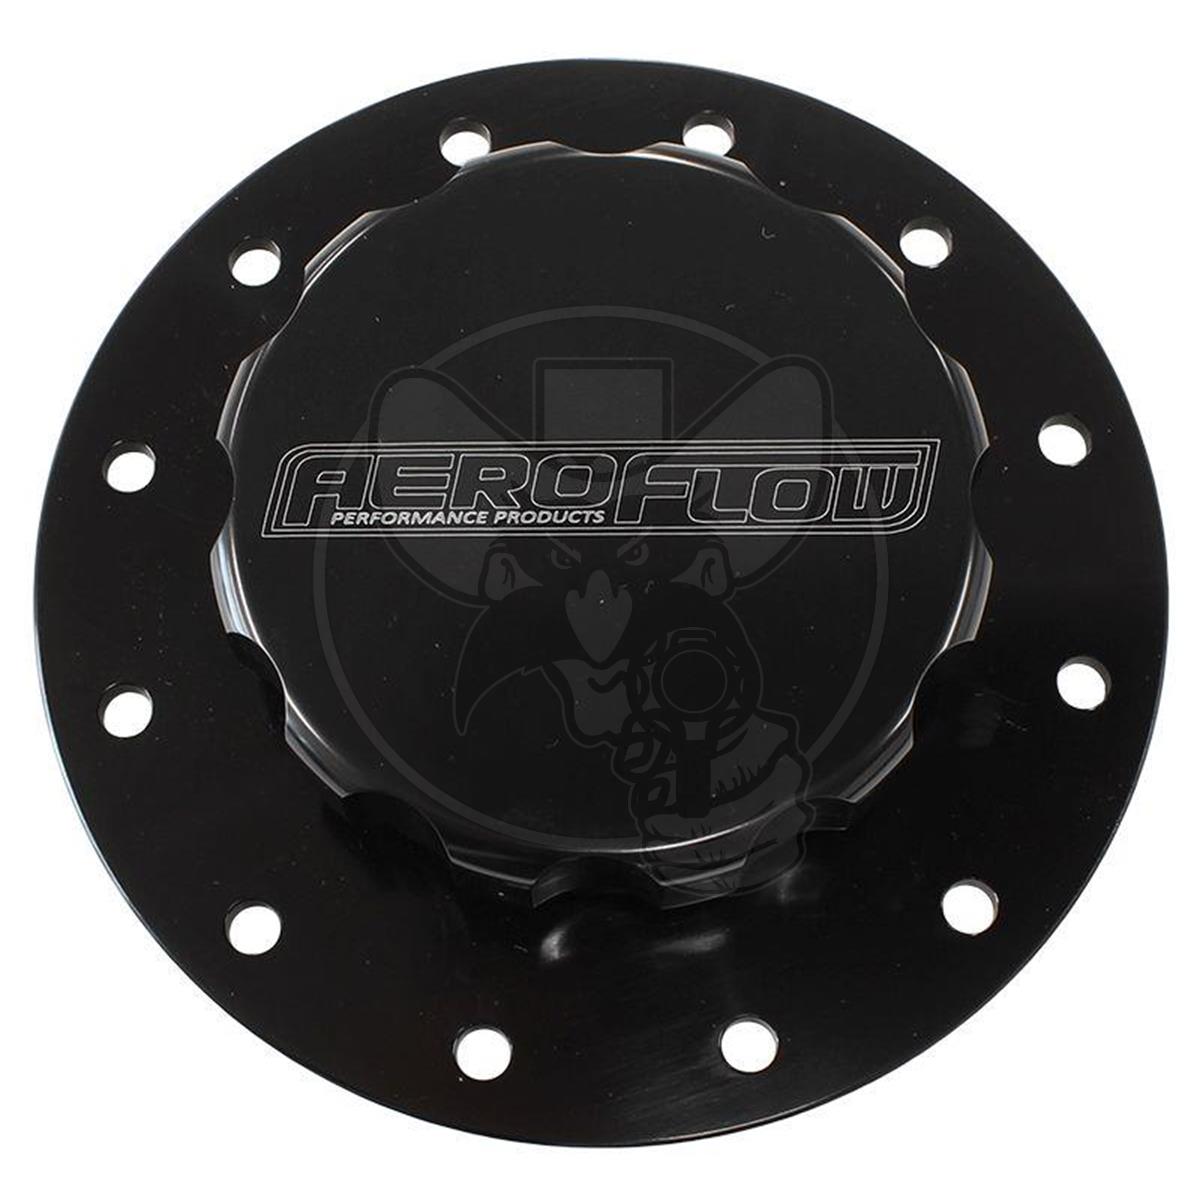 AEROFLOW BILLET ALLOY FUEL CELL SCREW-ON CAP WITH GASKETS - BLACK